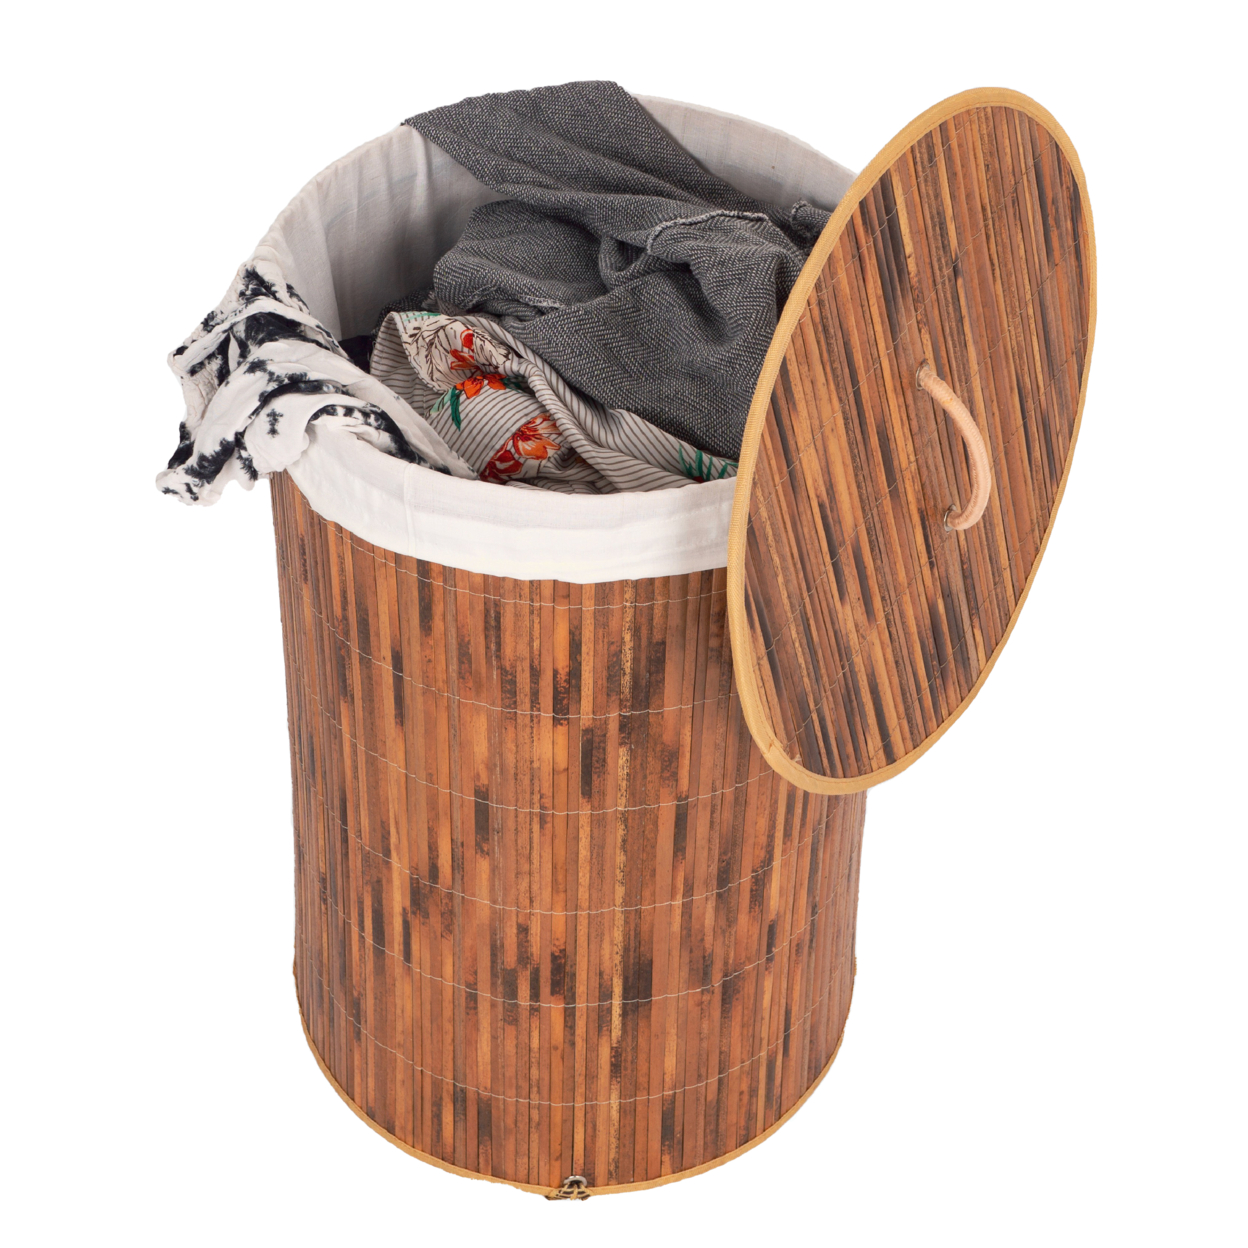 Foldable Laundry Hamper With Lid And Handles For Easy Carrying - Bamboo Round